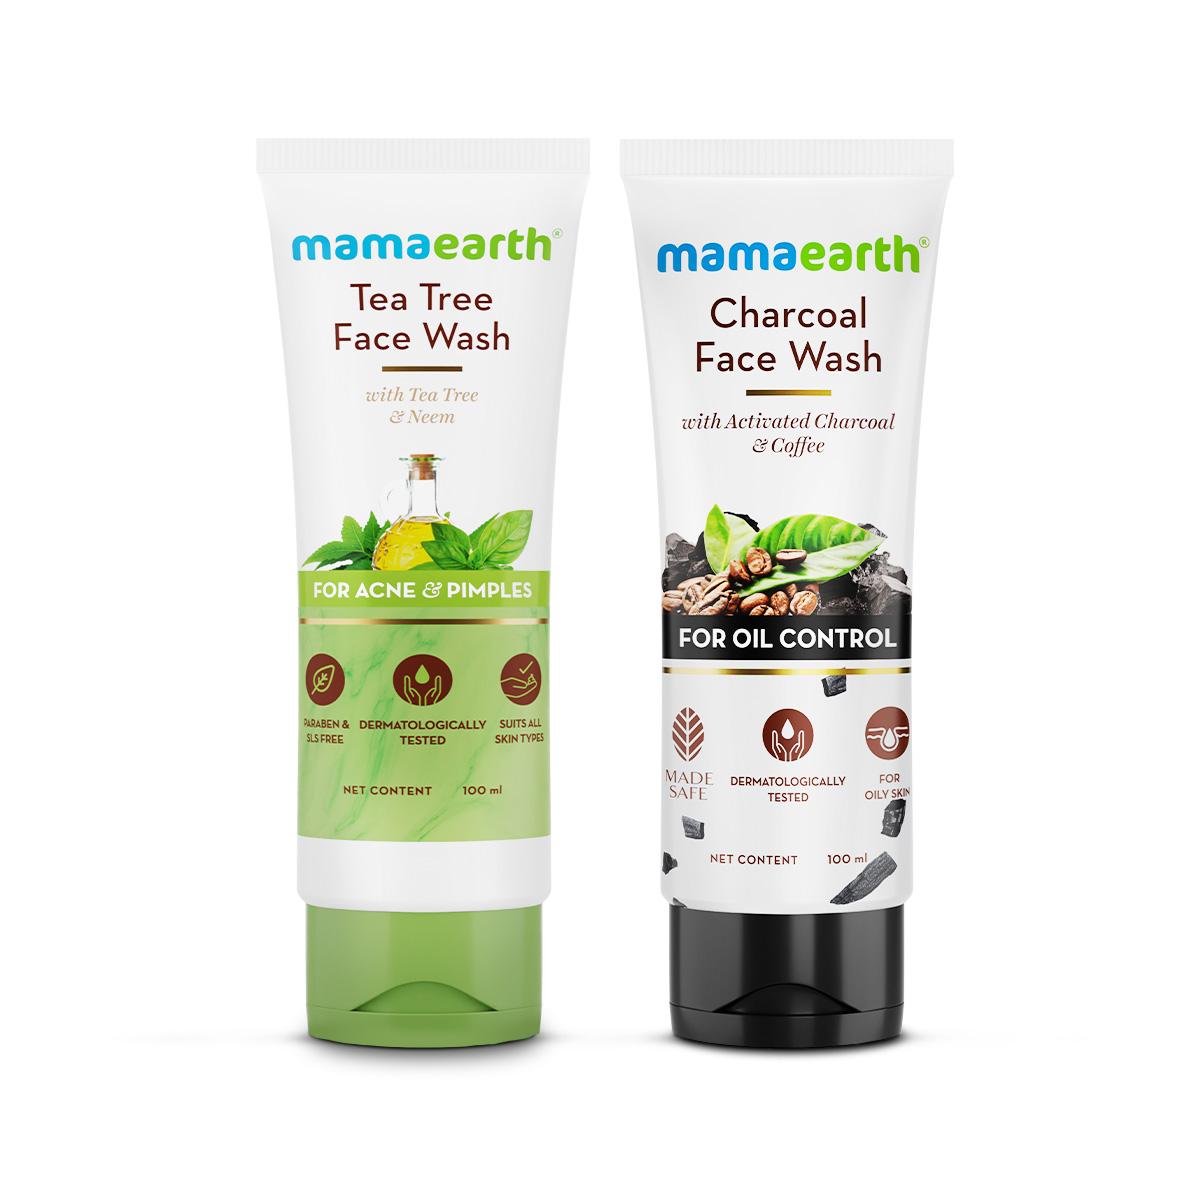 tea tree face wash and charcoal face wash combo - 100ml + 100ml